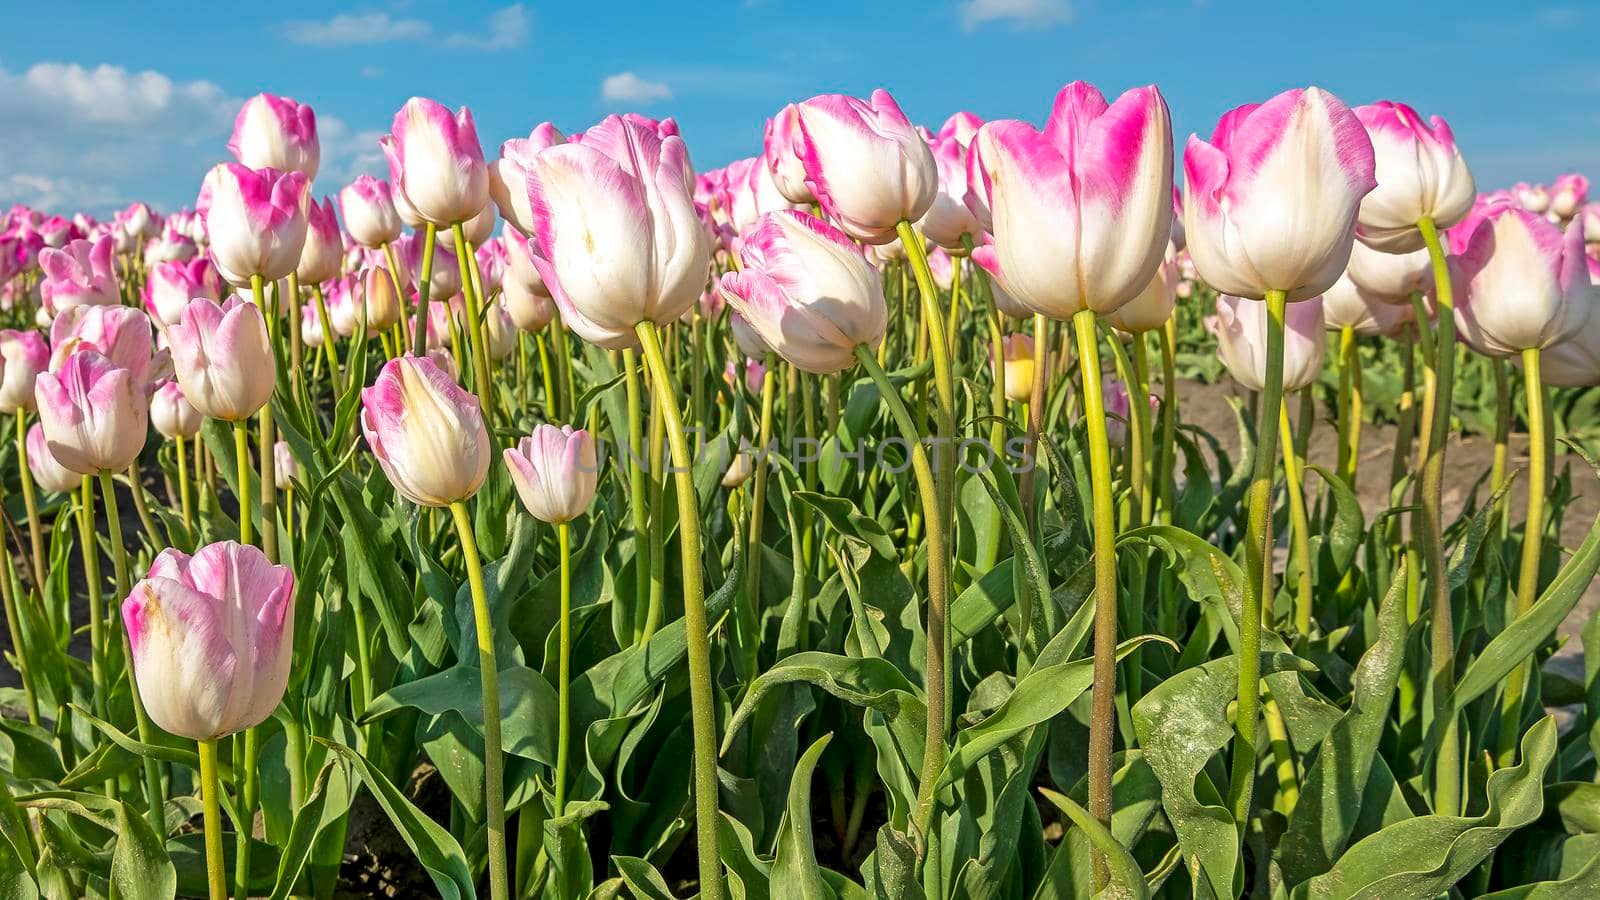 Blossoming pink tulips in the countryside from the Netherlands by devy